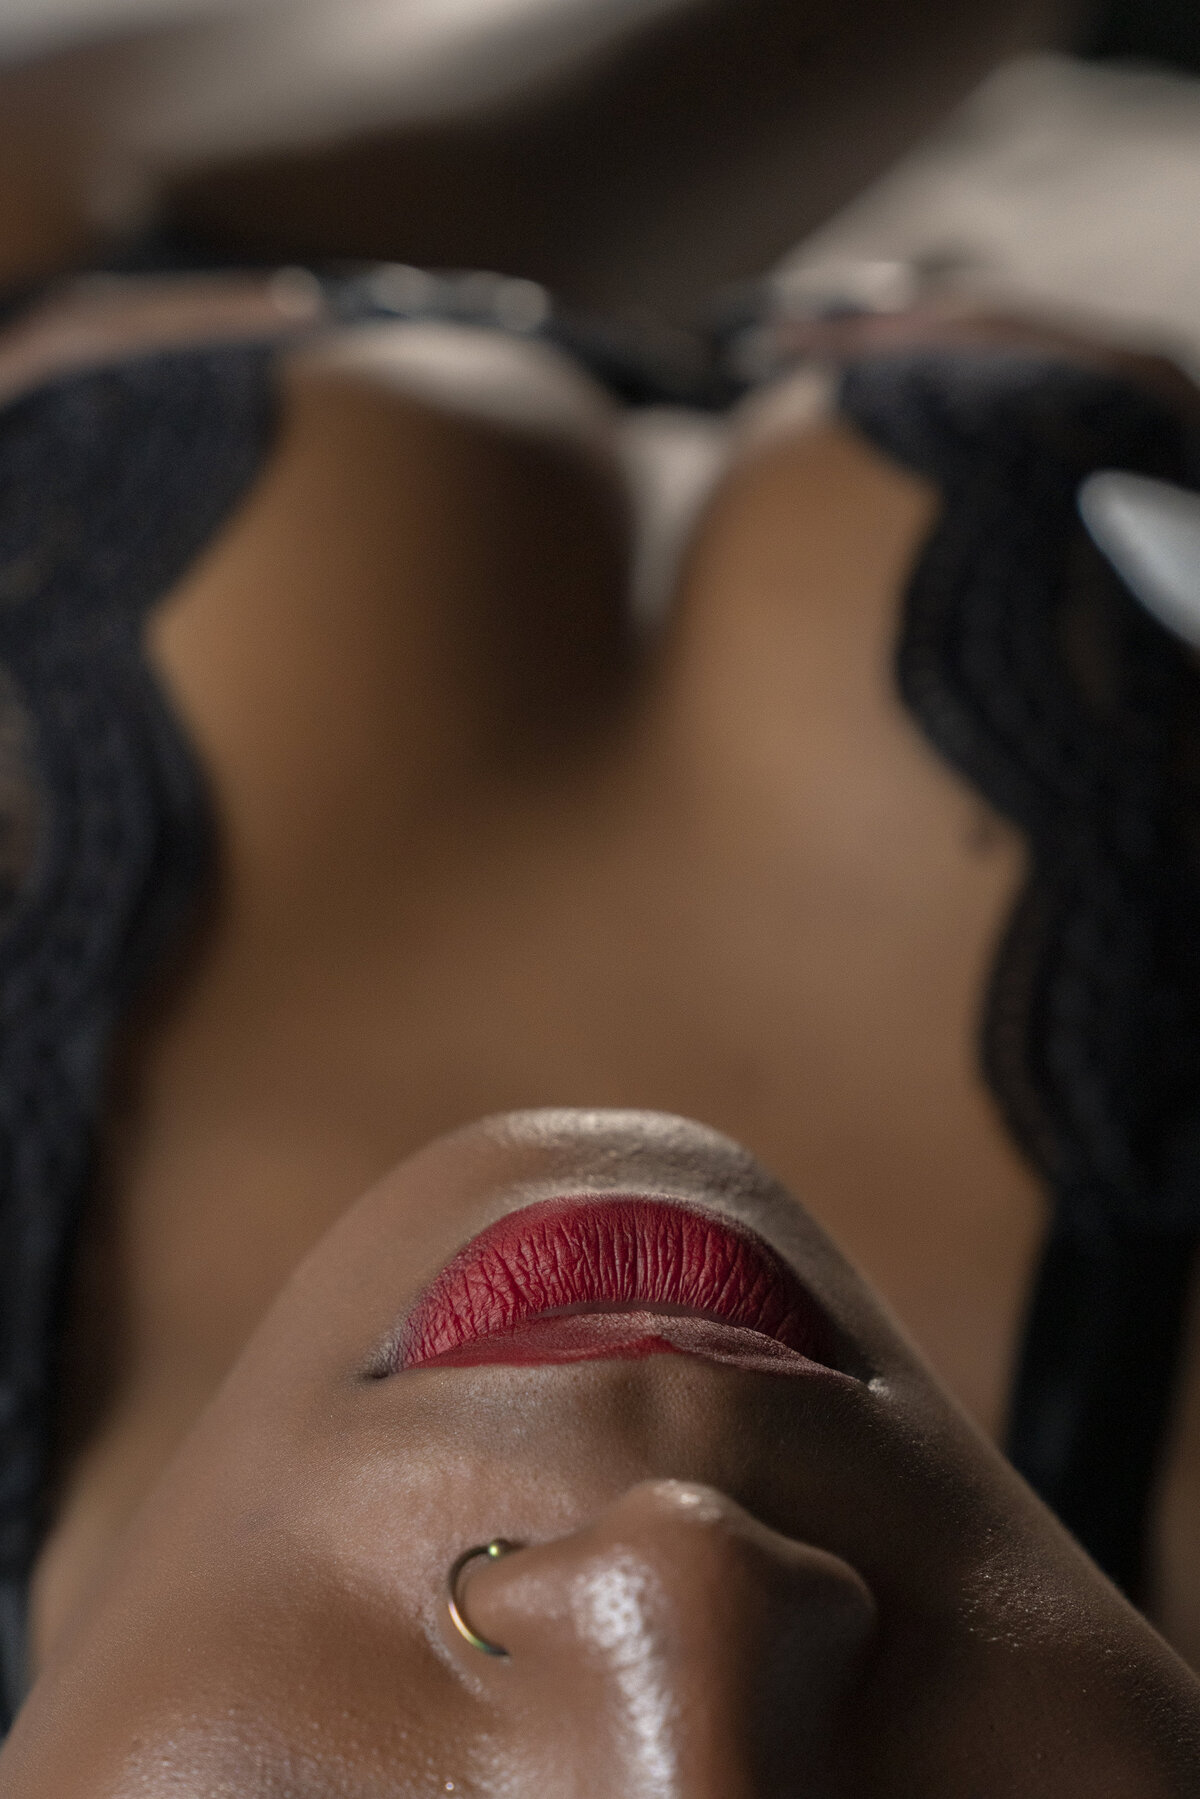 close up image of woman's lips and cleveage